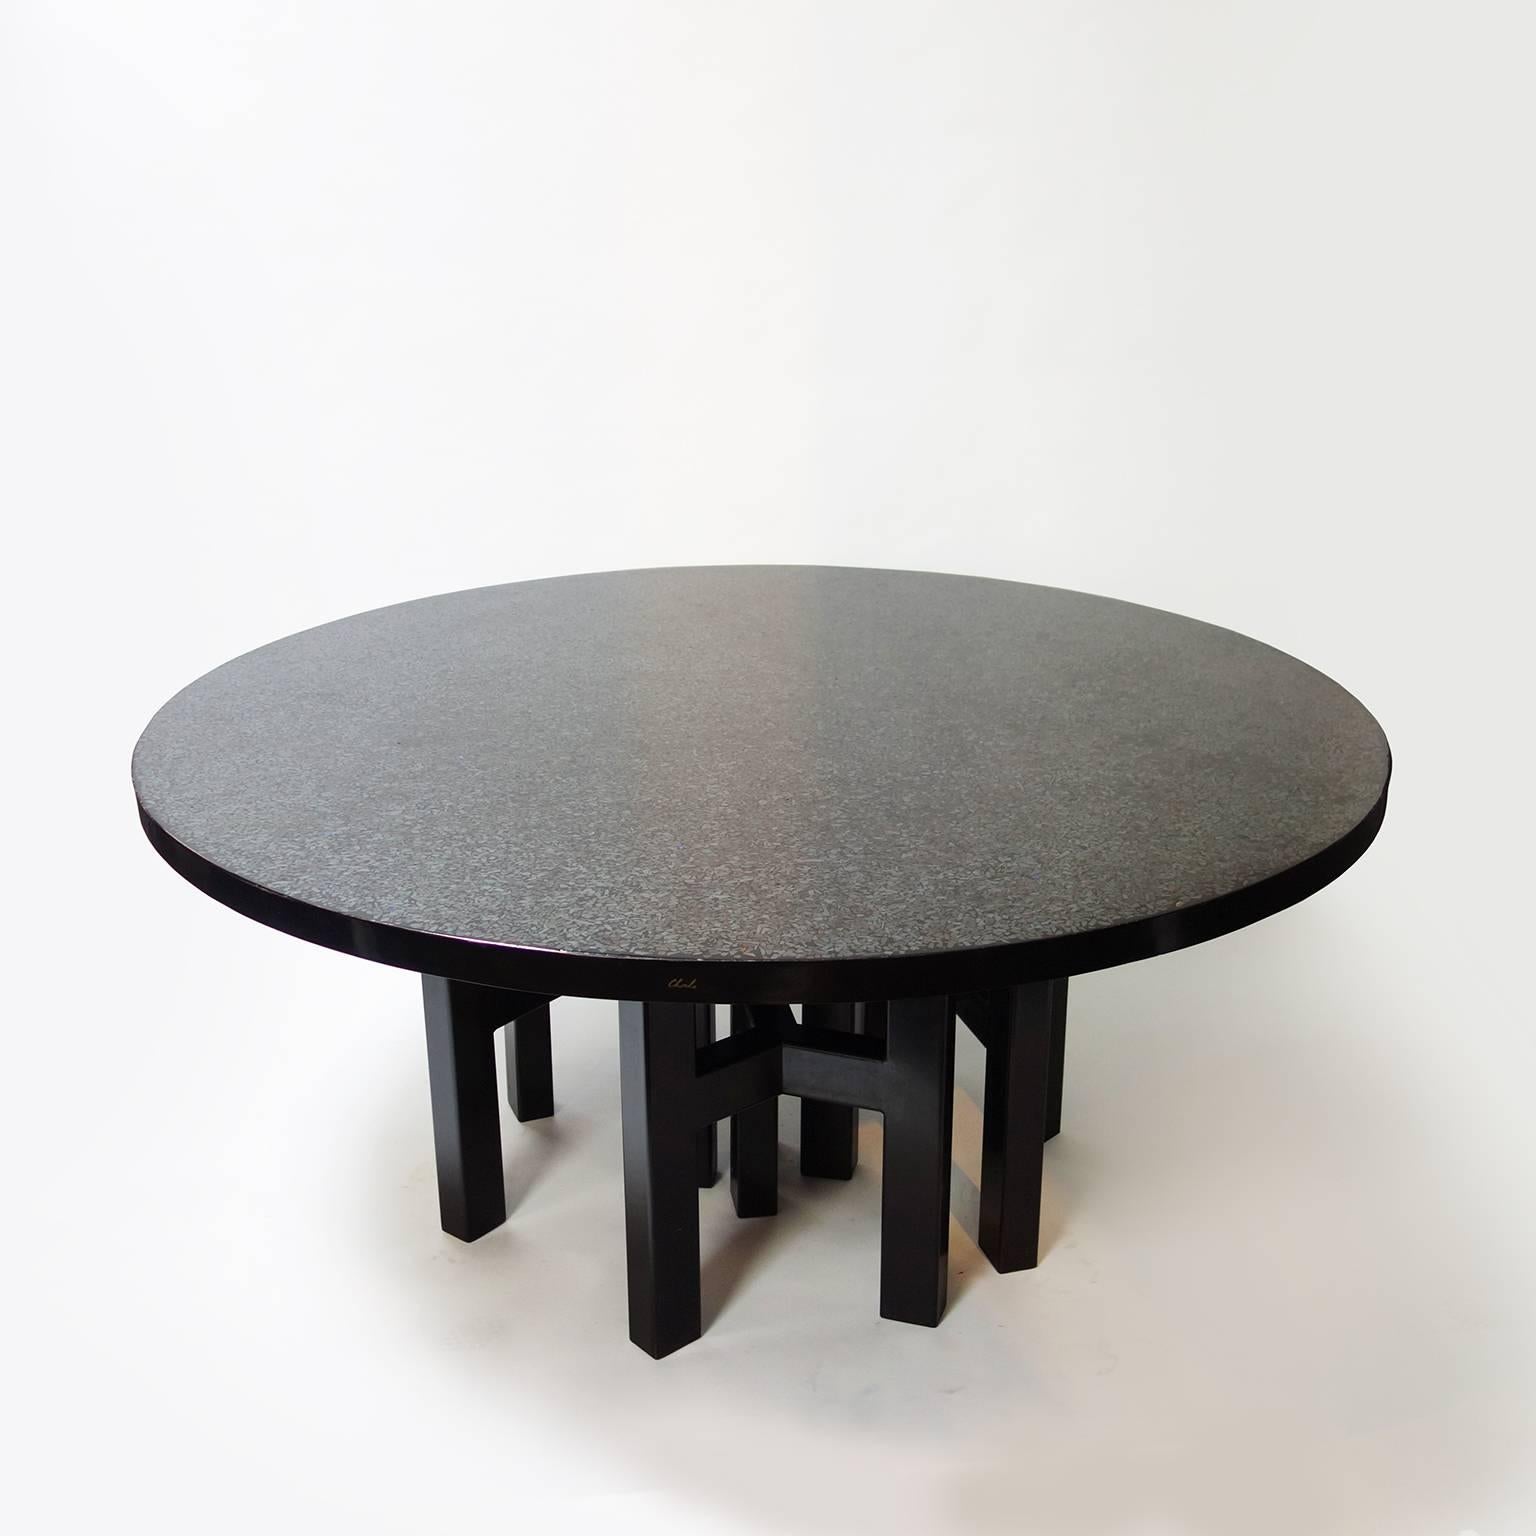 Dining room table by Ado Chale composed of a tabletop, in black resin with a mosaïc of hematite stone speckled with lapis lazuli stone and a set of four tripods legs in lacquered steel or polished aluminum.

Signed 